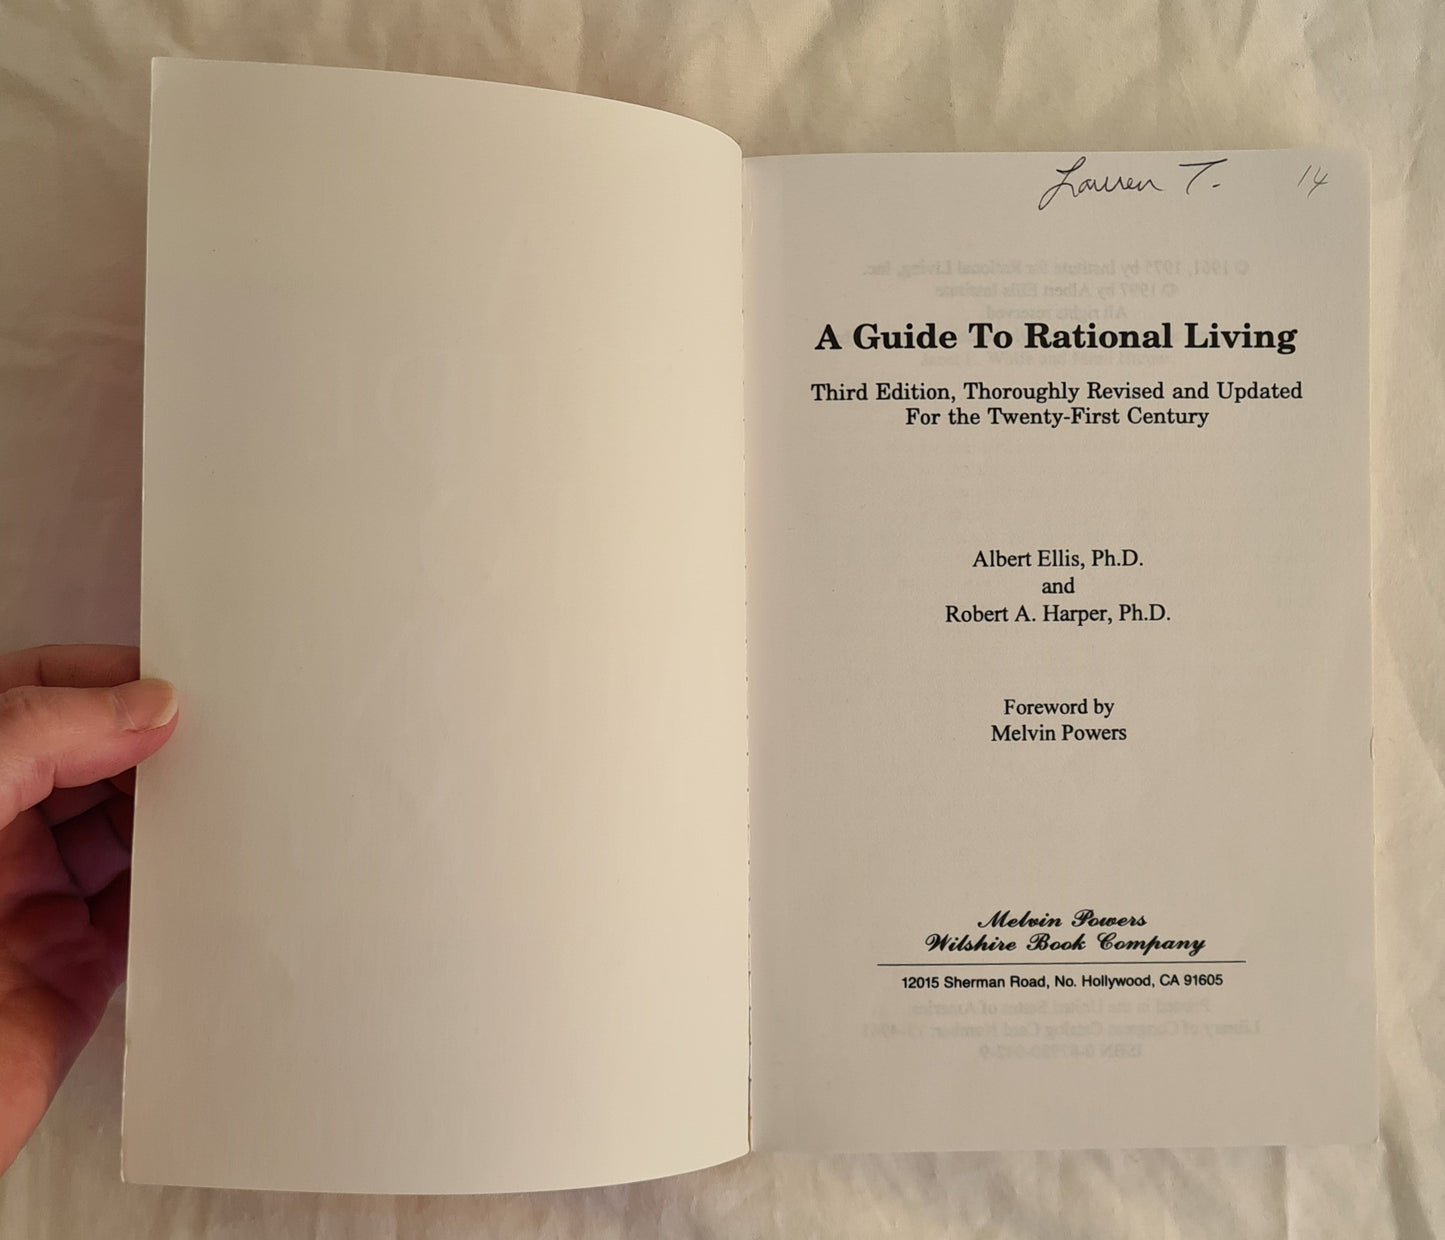 A Guide to Rational Living by Albert Ellis and Robert A. Harper